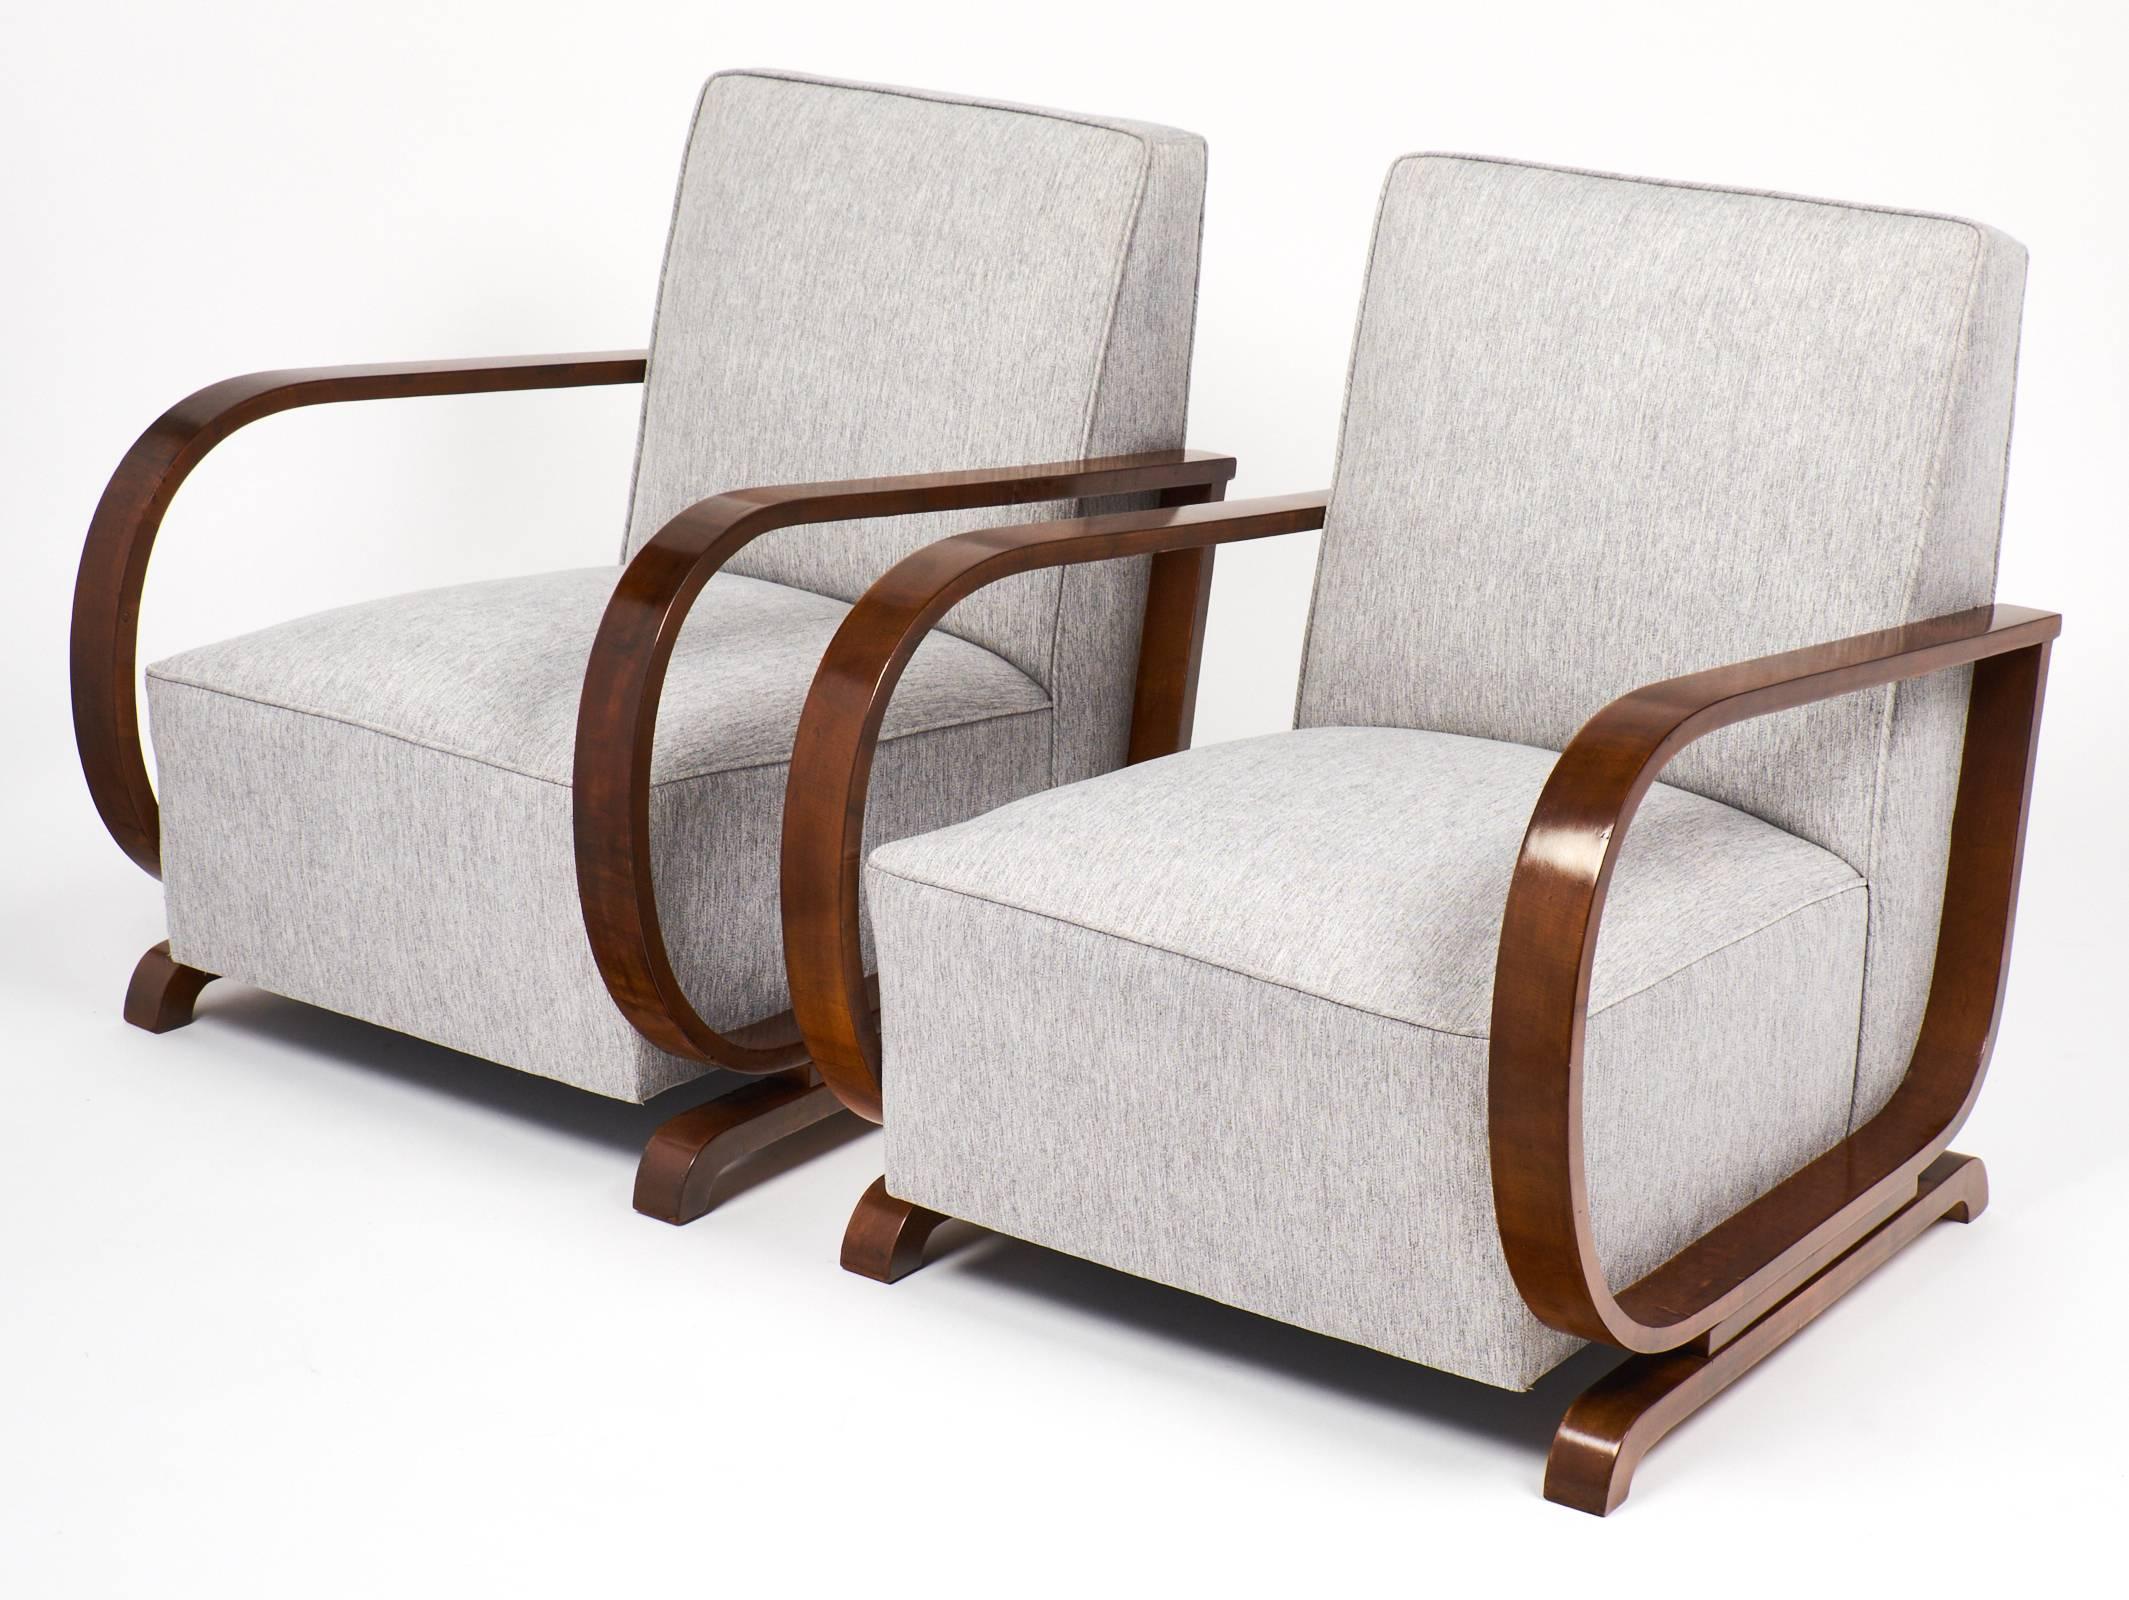 Pair of Art Deco armchairs from Vienna (Austria.) Strong solid walnut frames finished with a lustrous French polish. Dynamic lines and comfortable lounge seating. Professionally upholstered in a linen blend.